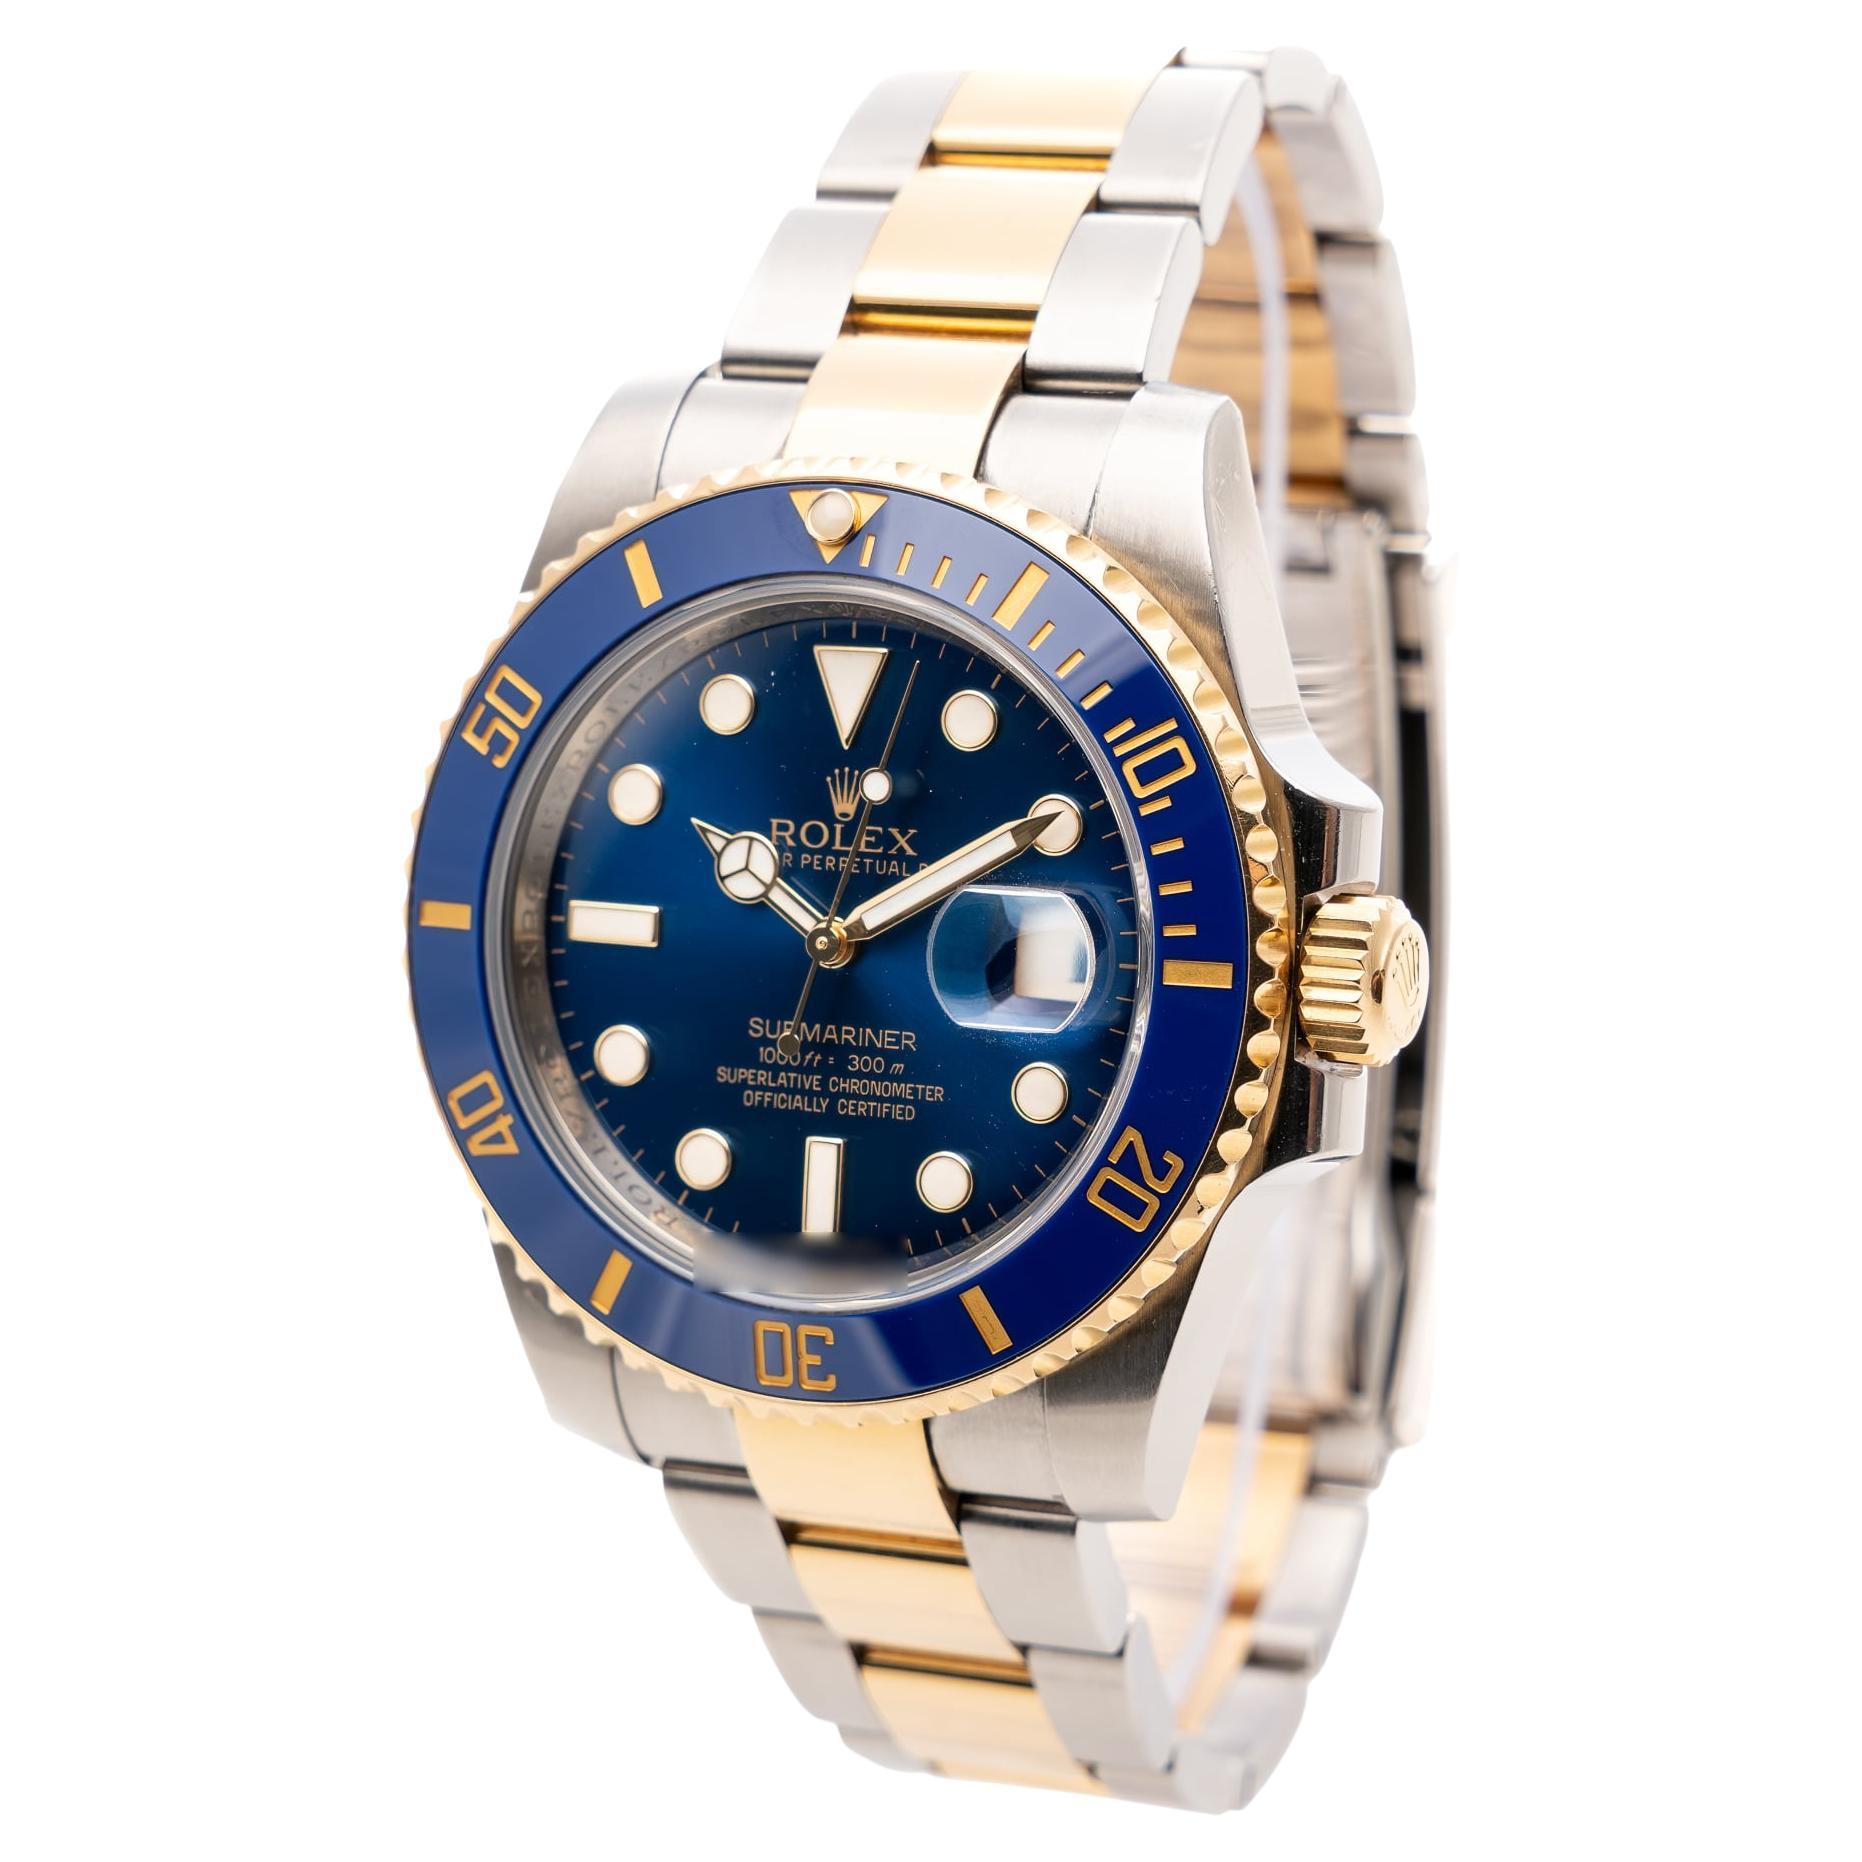 Rolex Submariner Date 40mm Two Tone Blue Ceramic Dial Oyster Ref: 116613LB